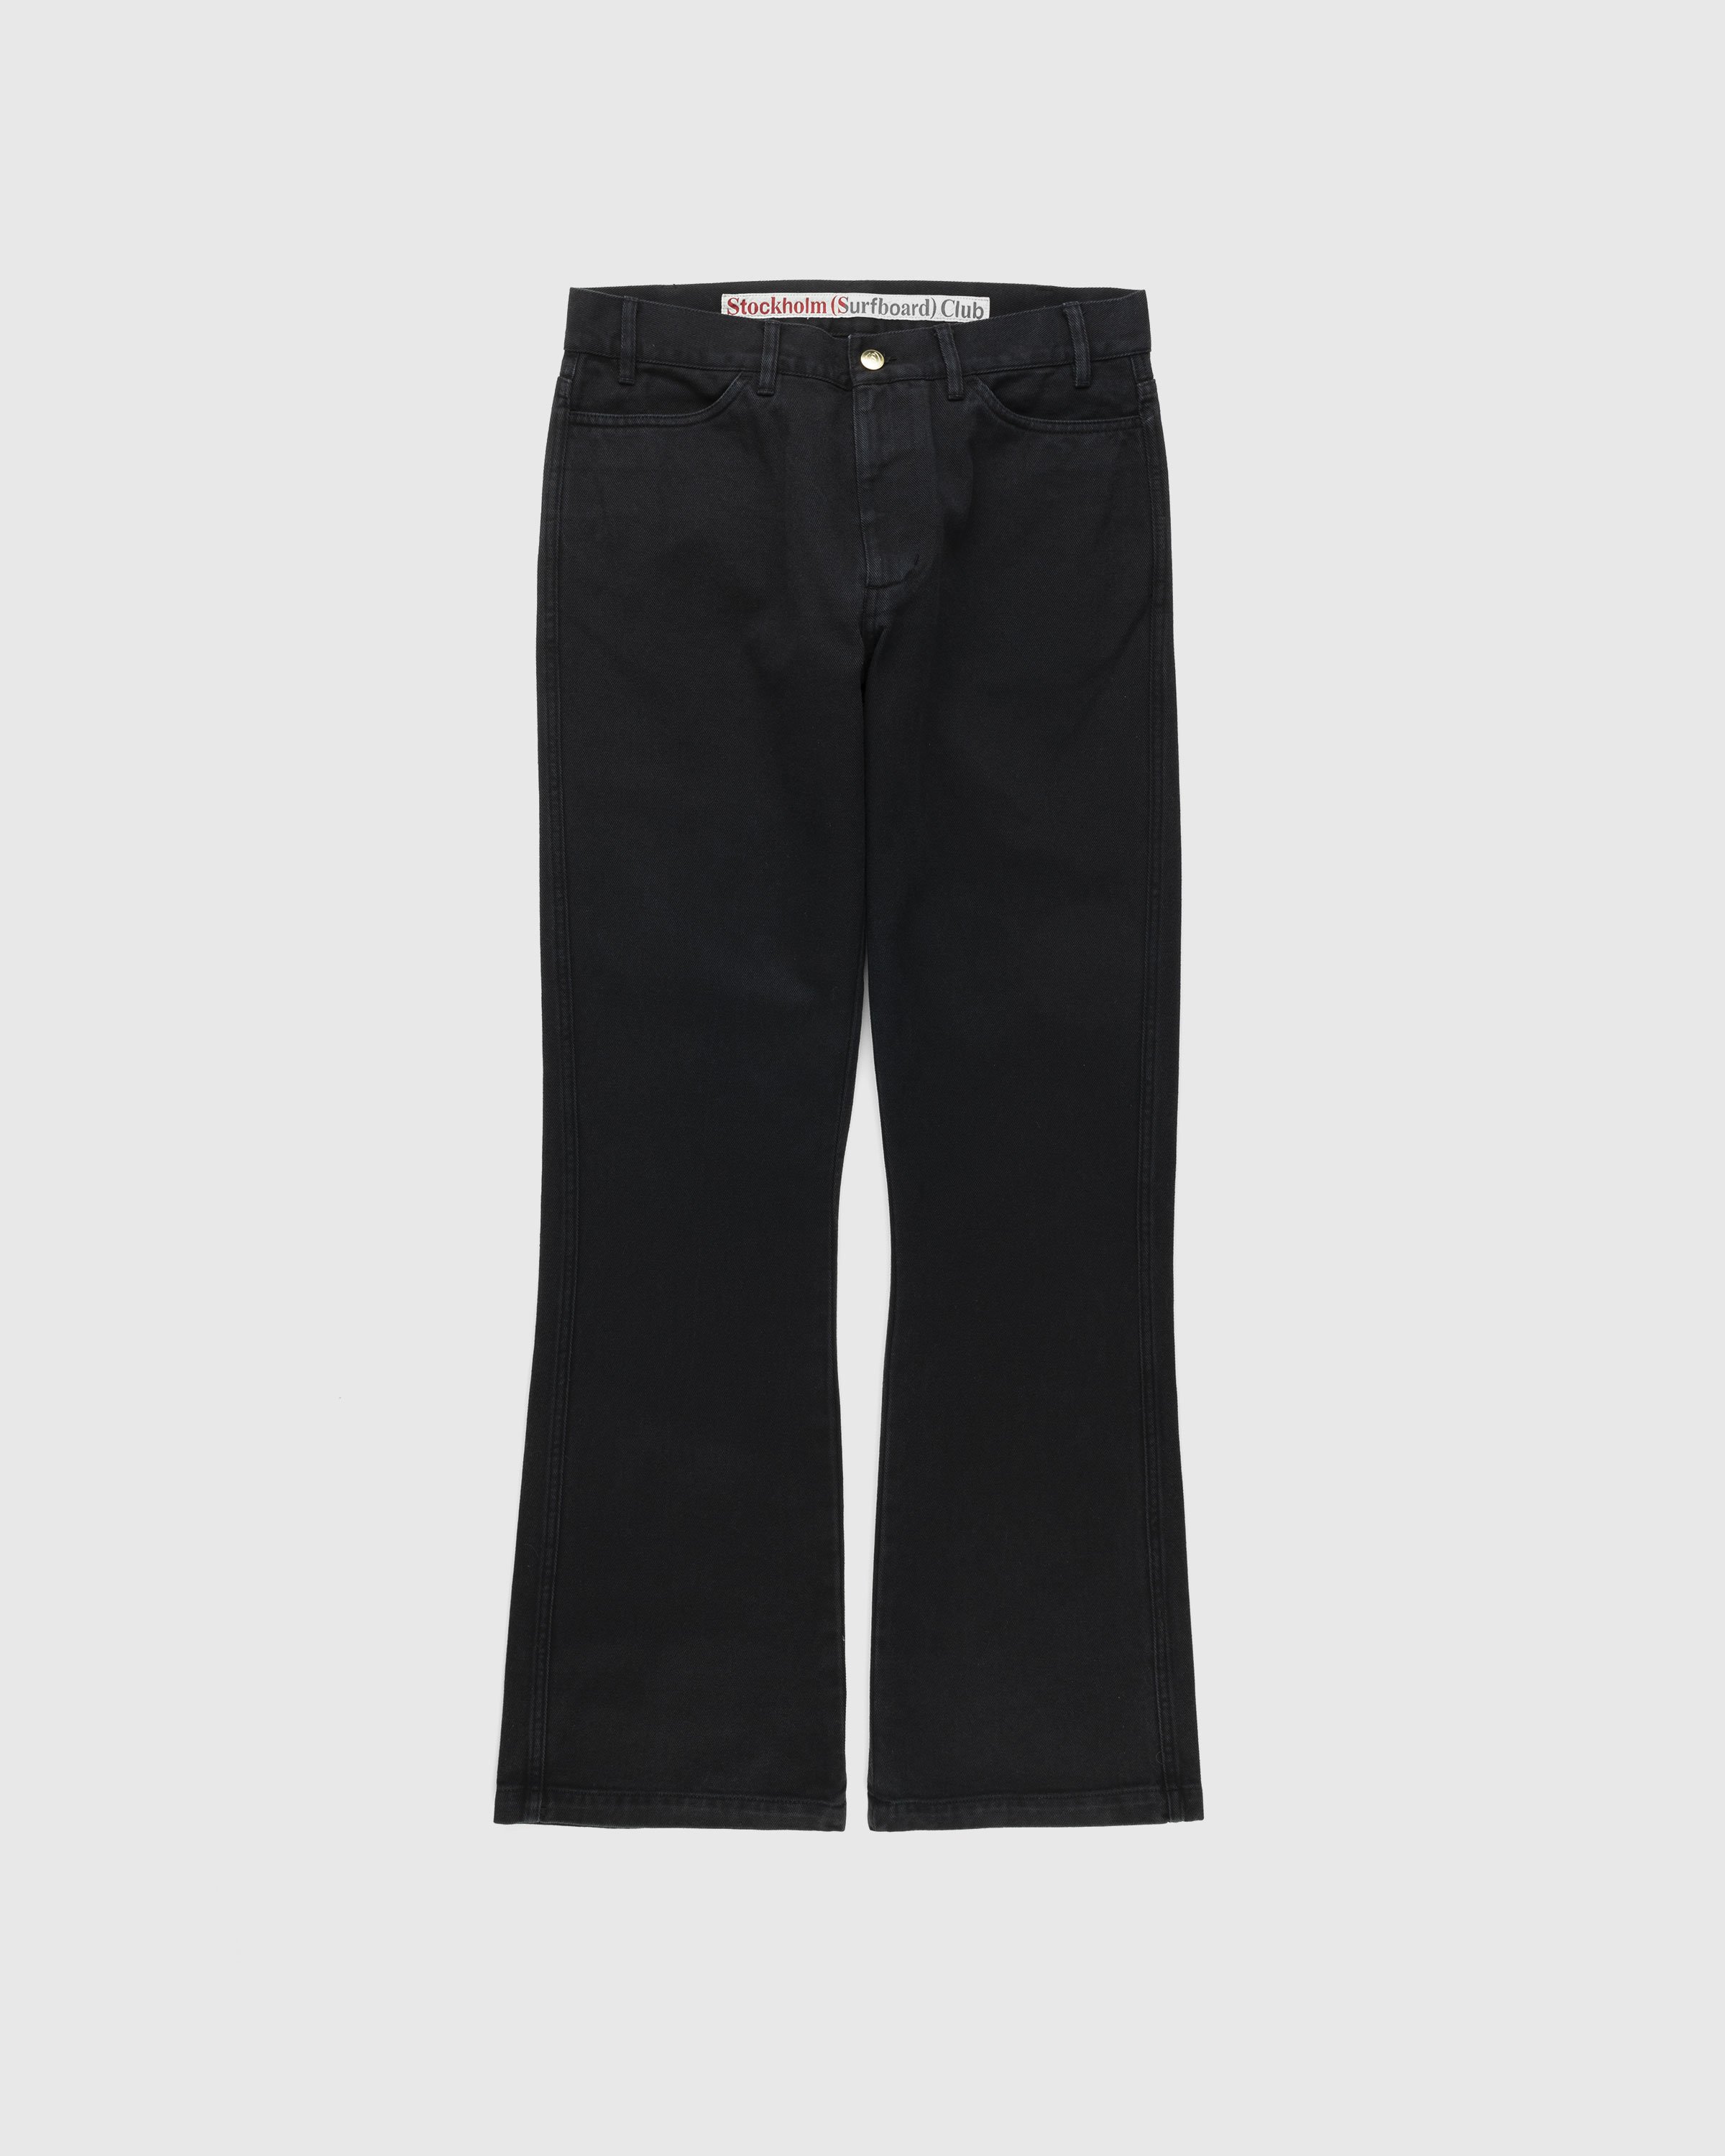 Stockholm Surfboard Club - Flared Cotton Twill Trousers Black - Clothing - Black - Image 1